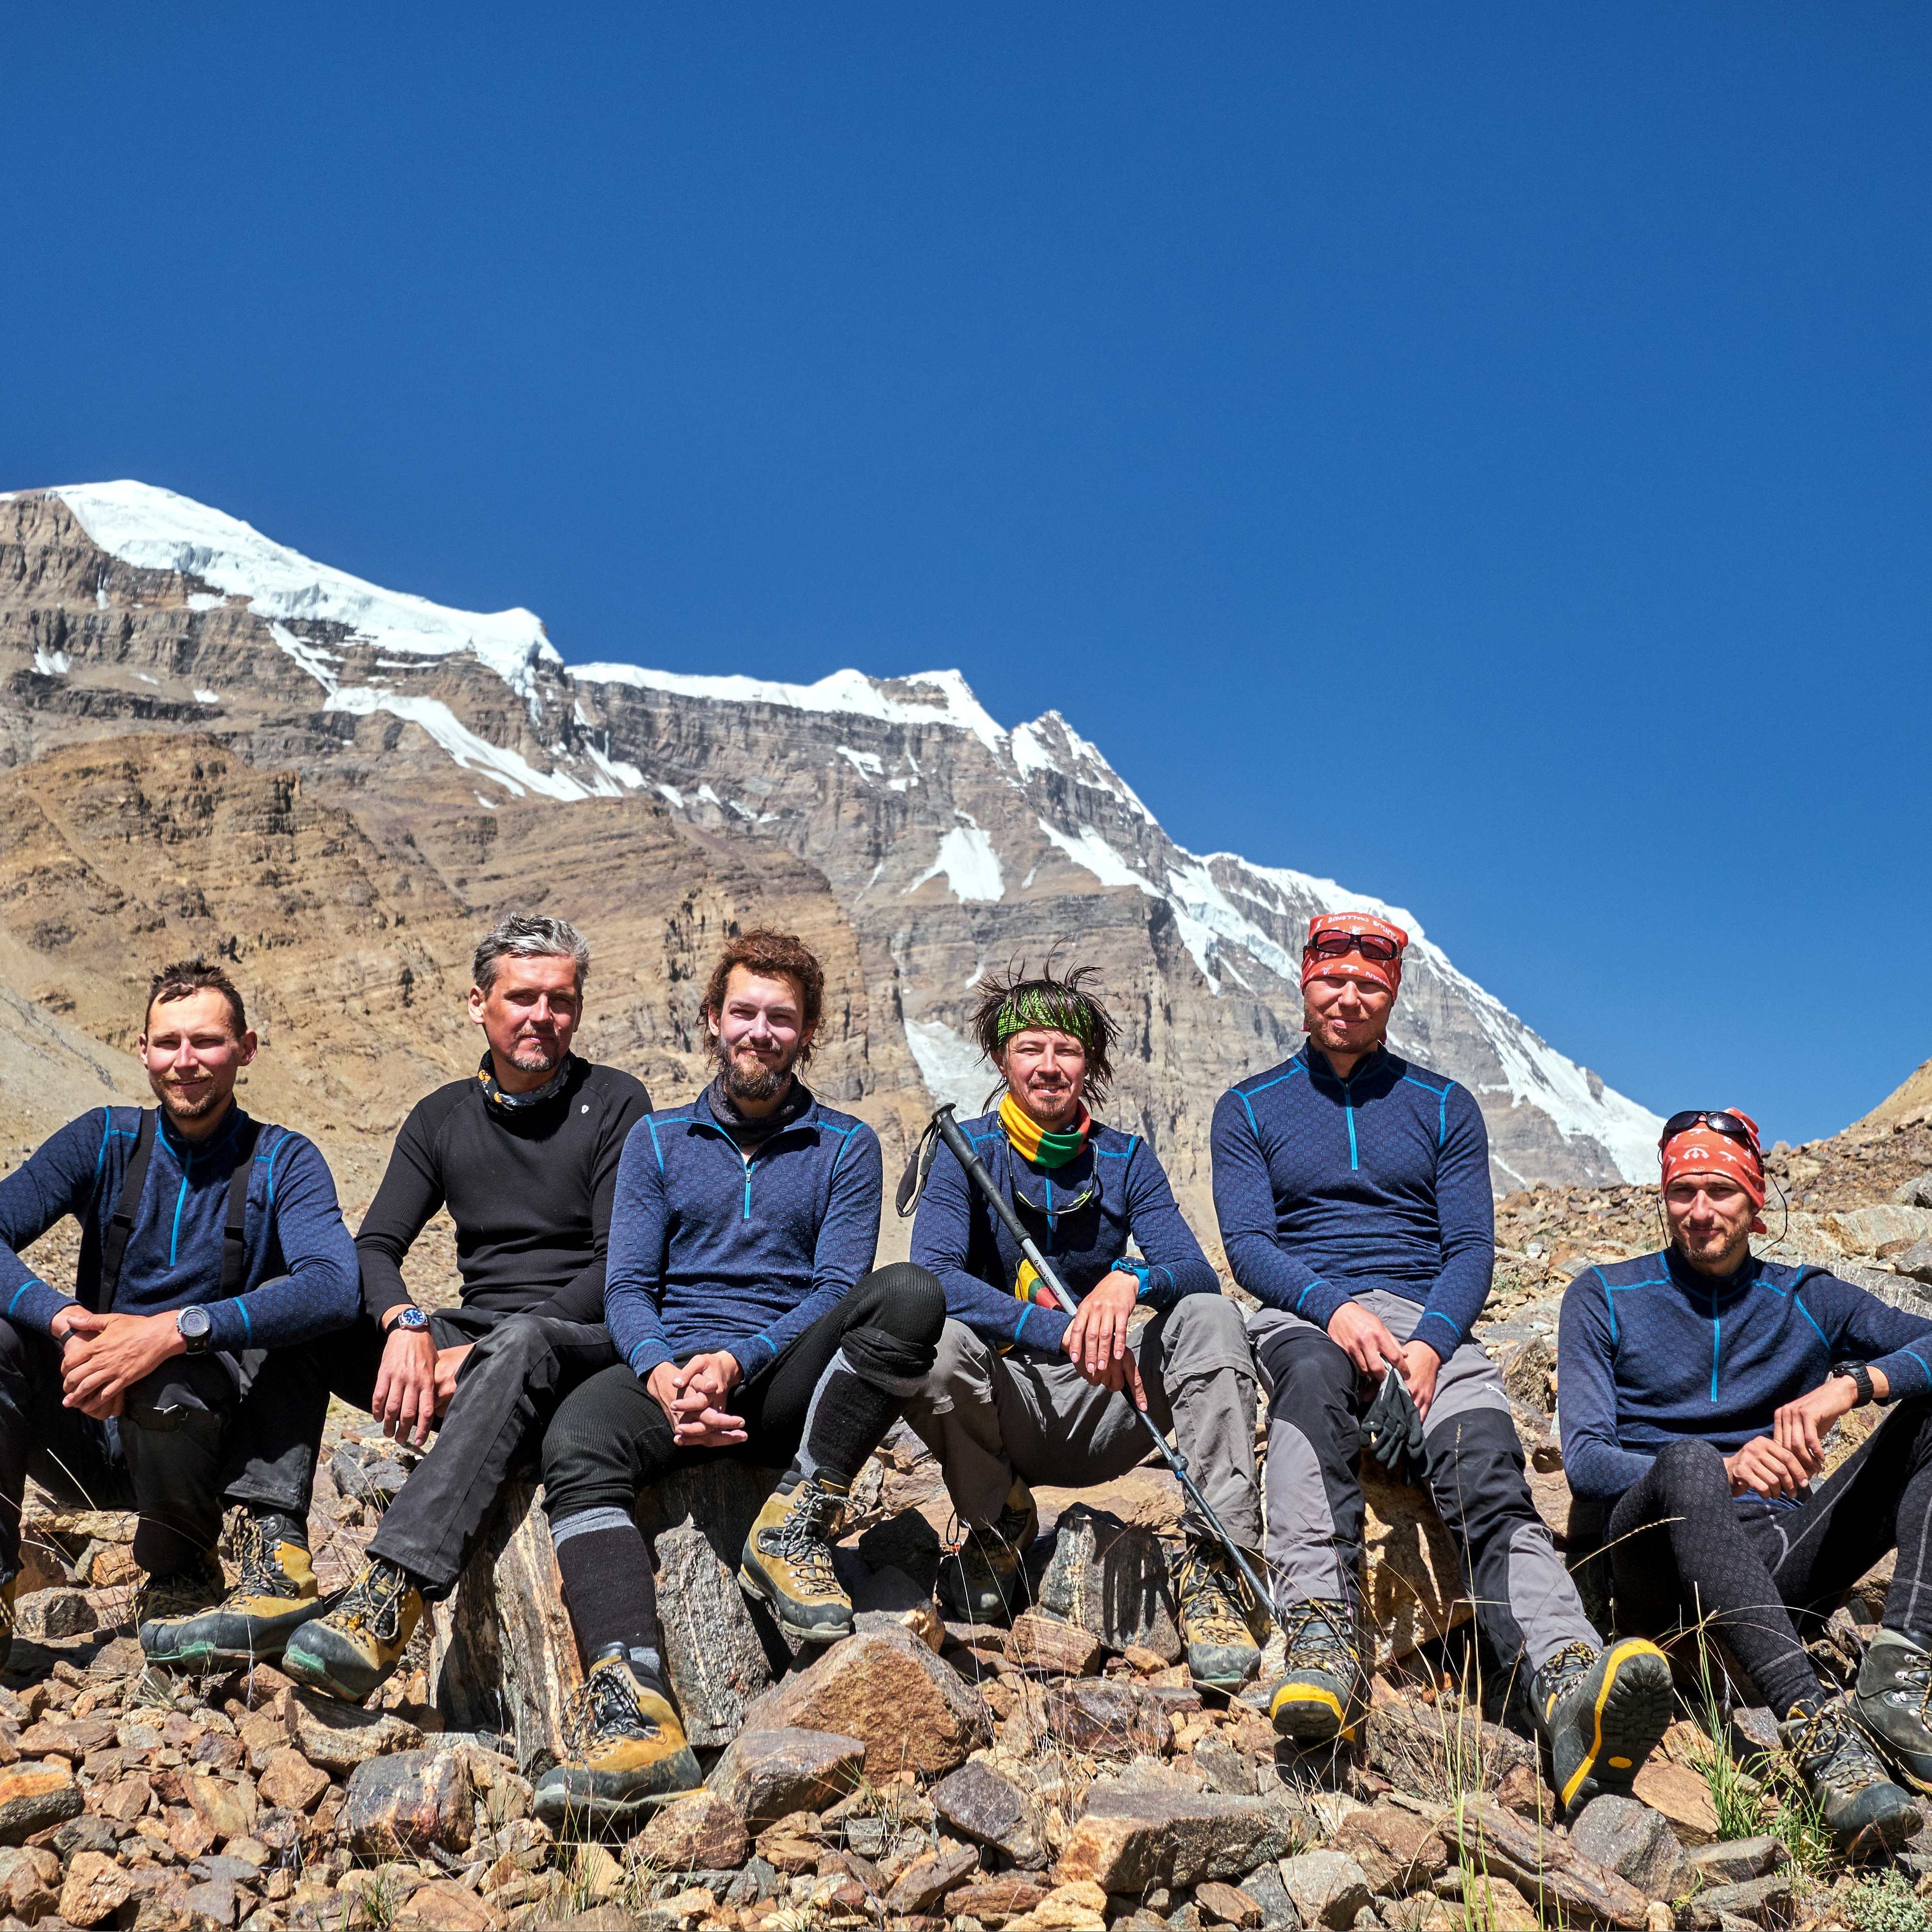 group of alpinists sitting on the rocks